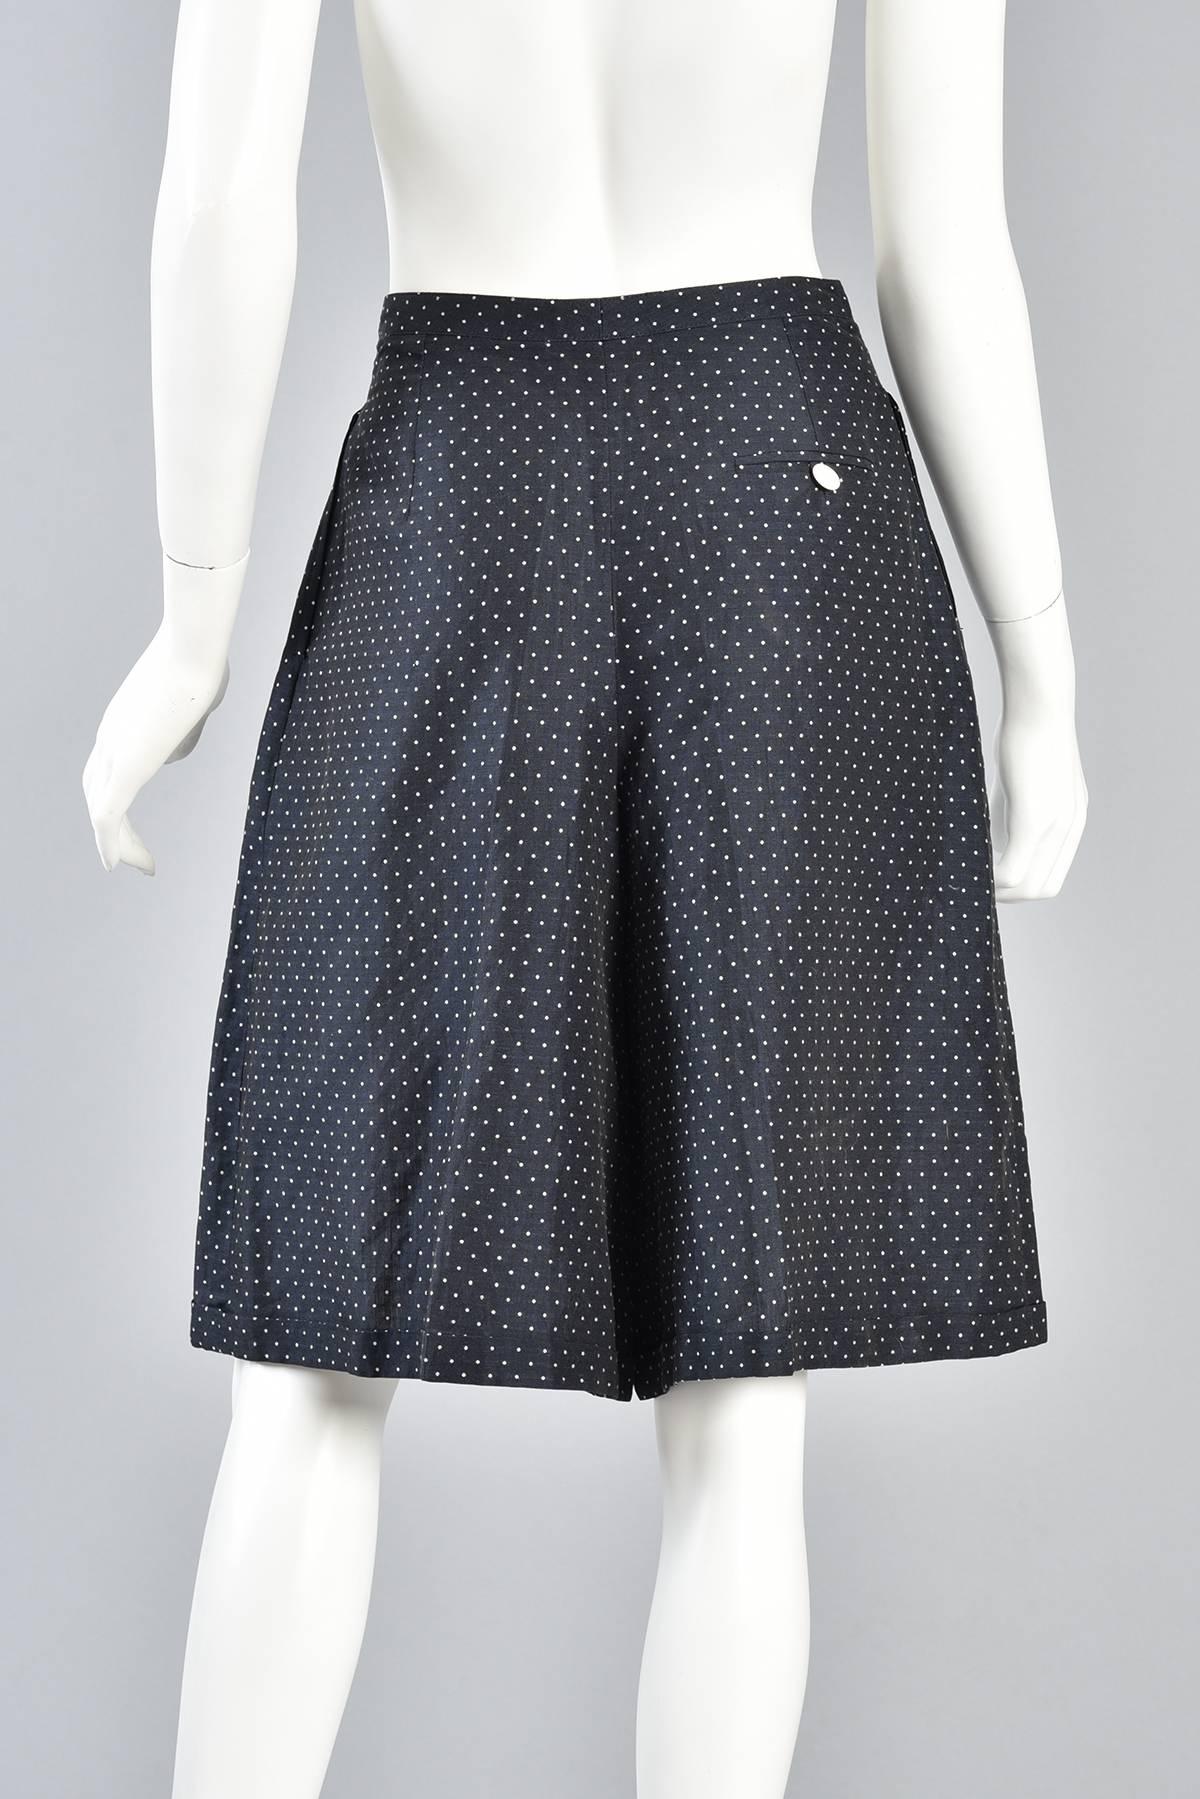 Navy Blue & White Flared Polkadot Culottes Shorts For Sale 5